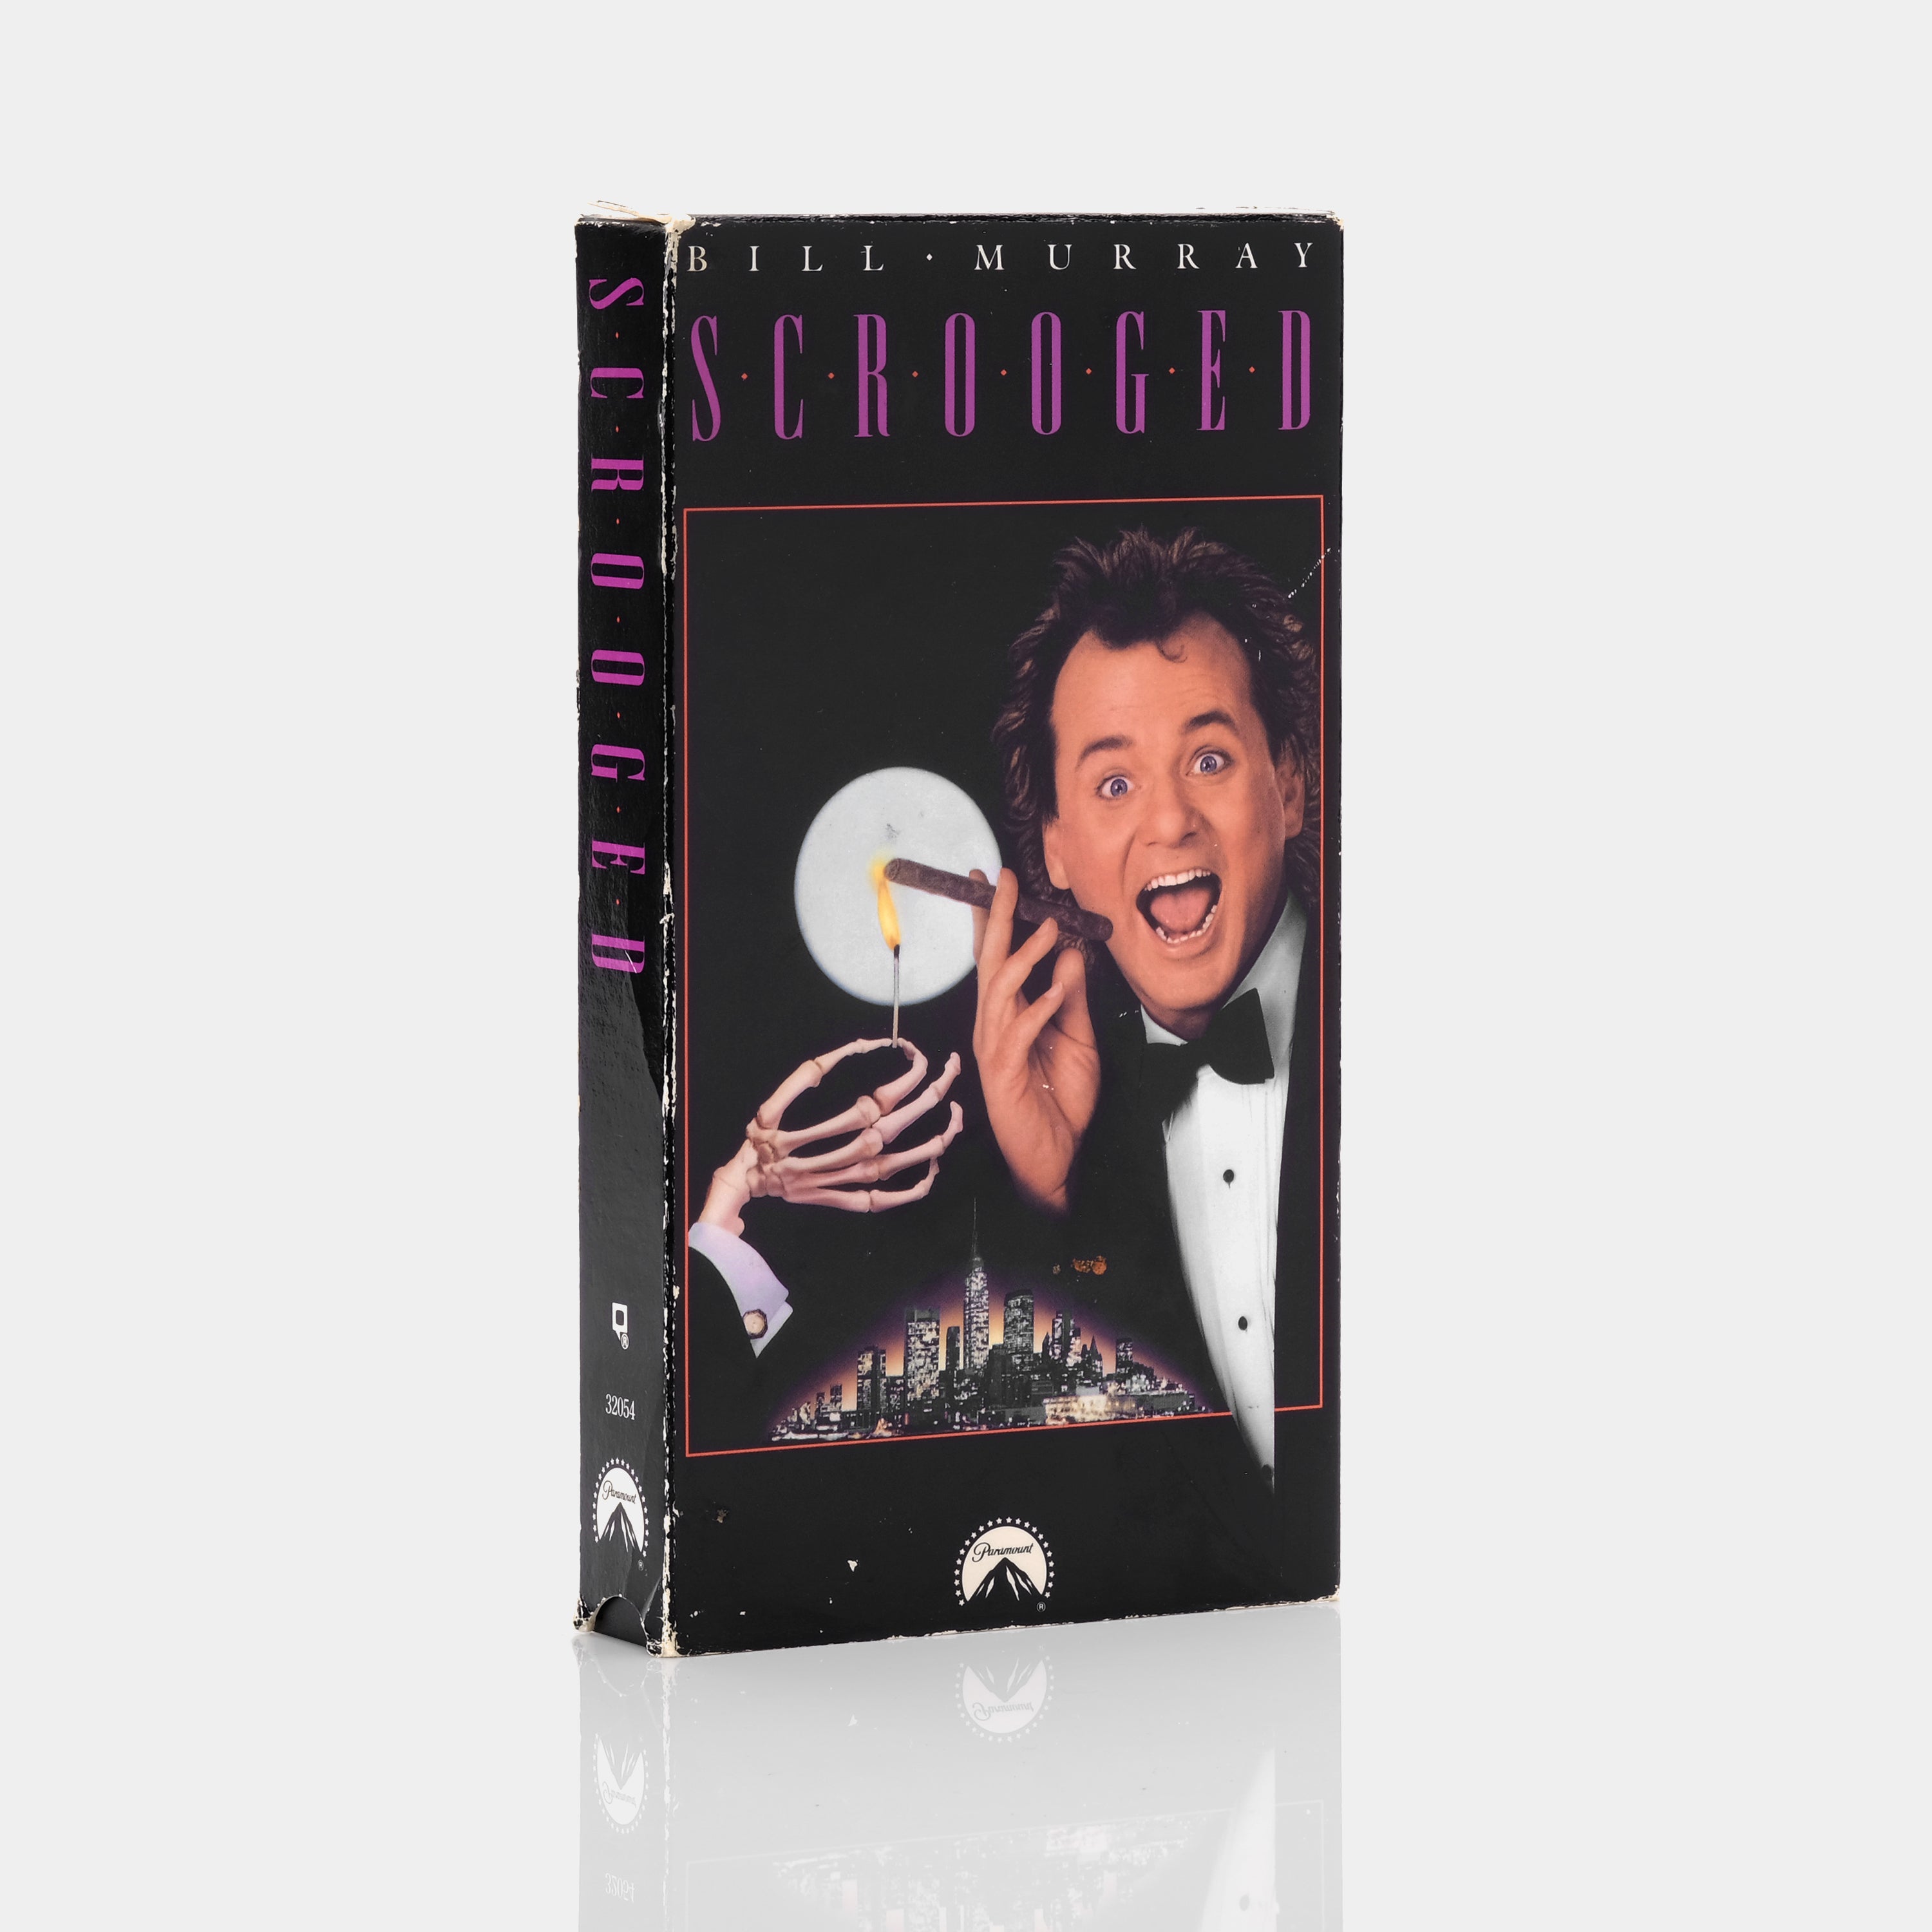 Scrooged VHS Tape